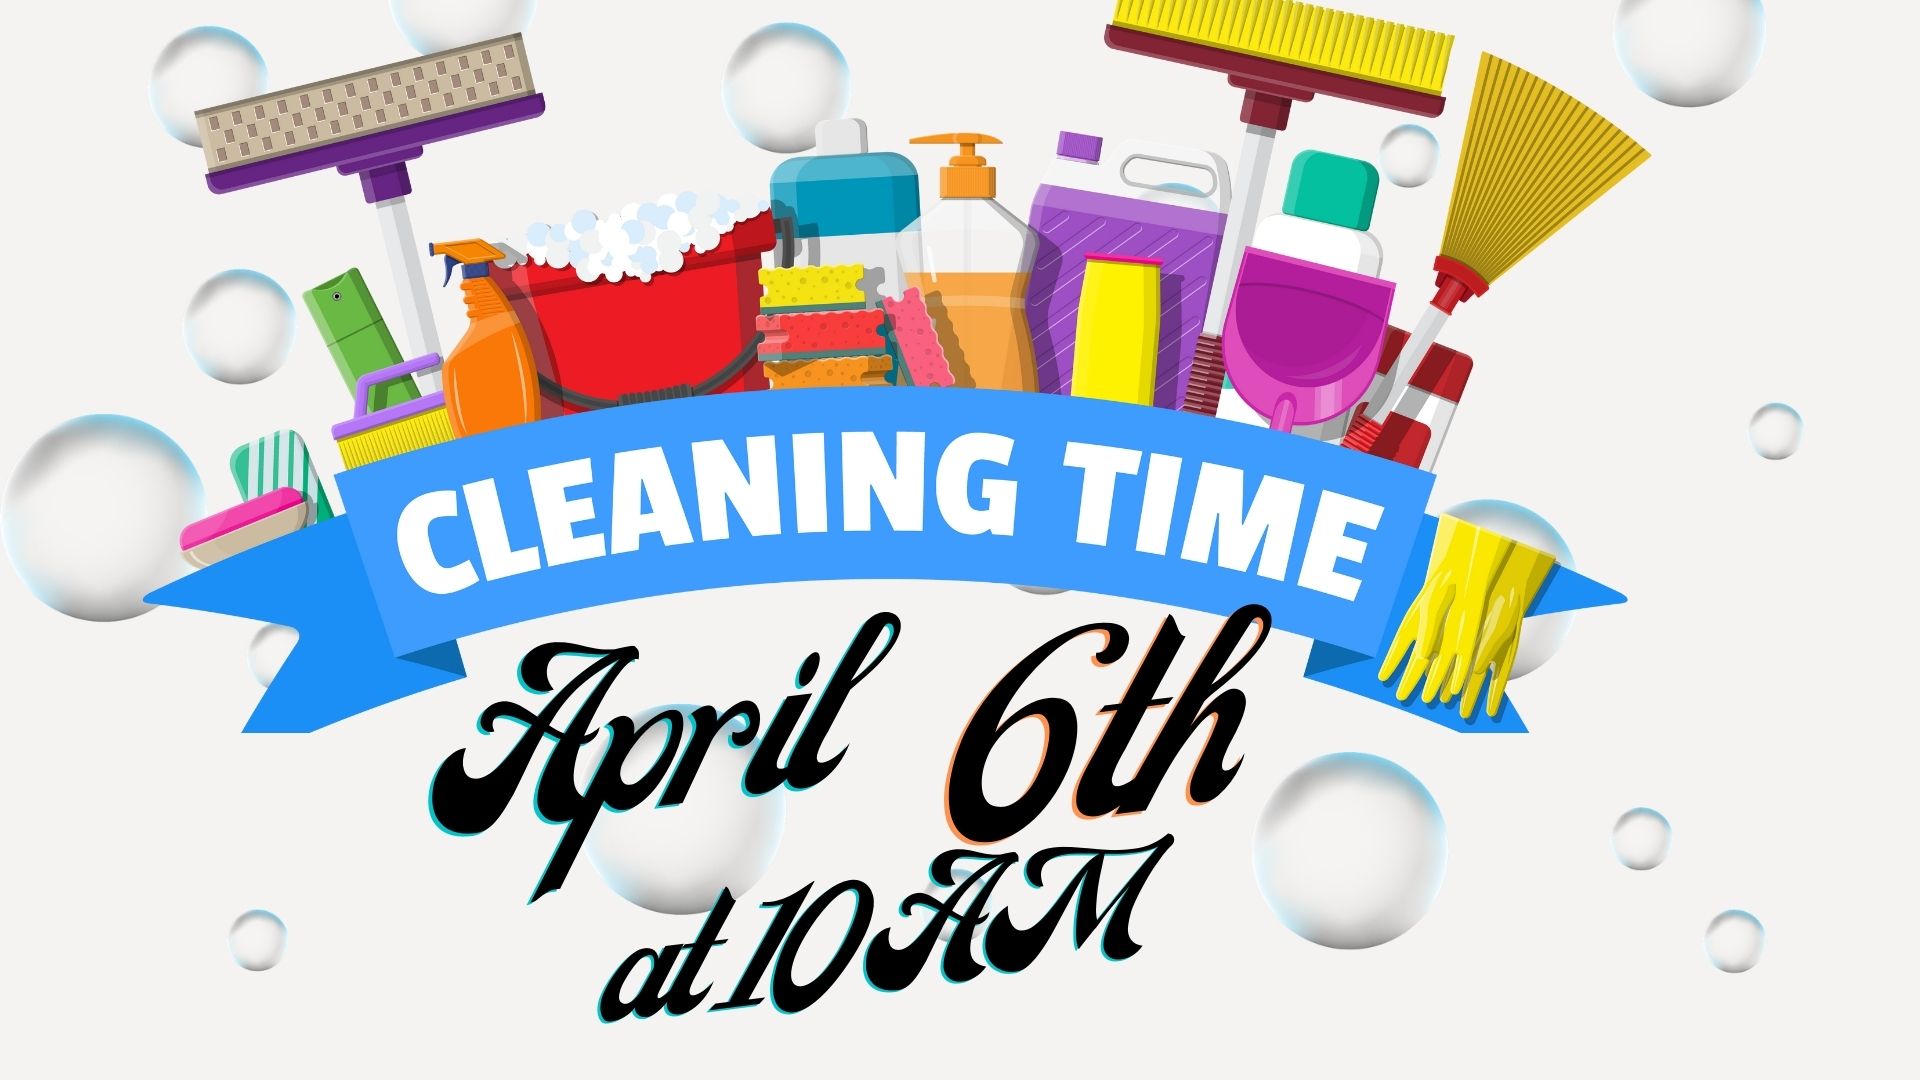 Church Spring Cleaning Day